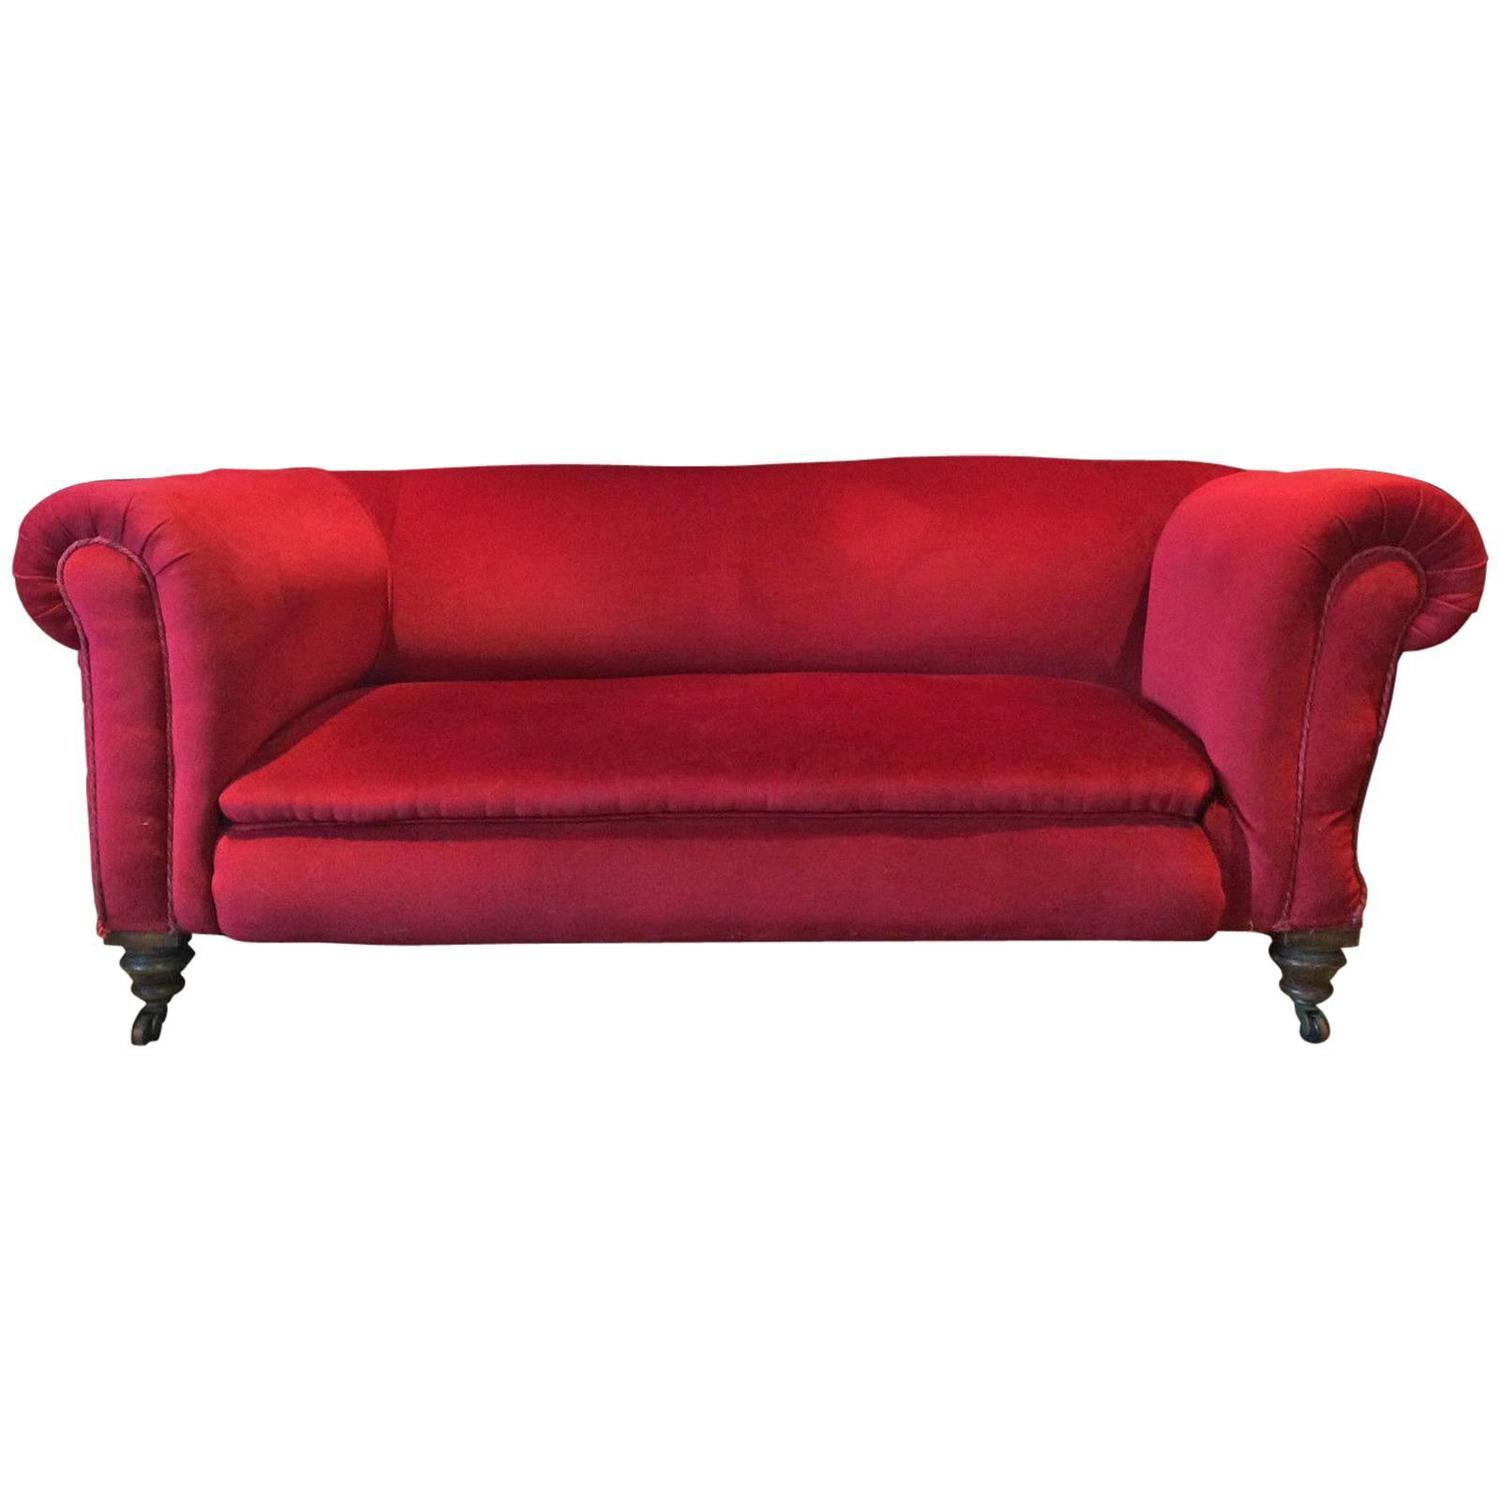 Antique Chesterfield Sofa Three-Seat Drop End Victorian Red Velvet